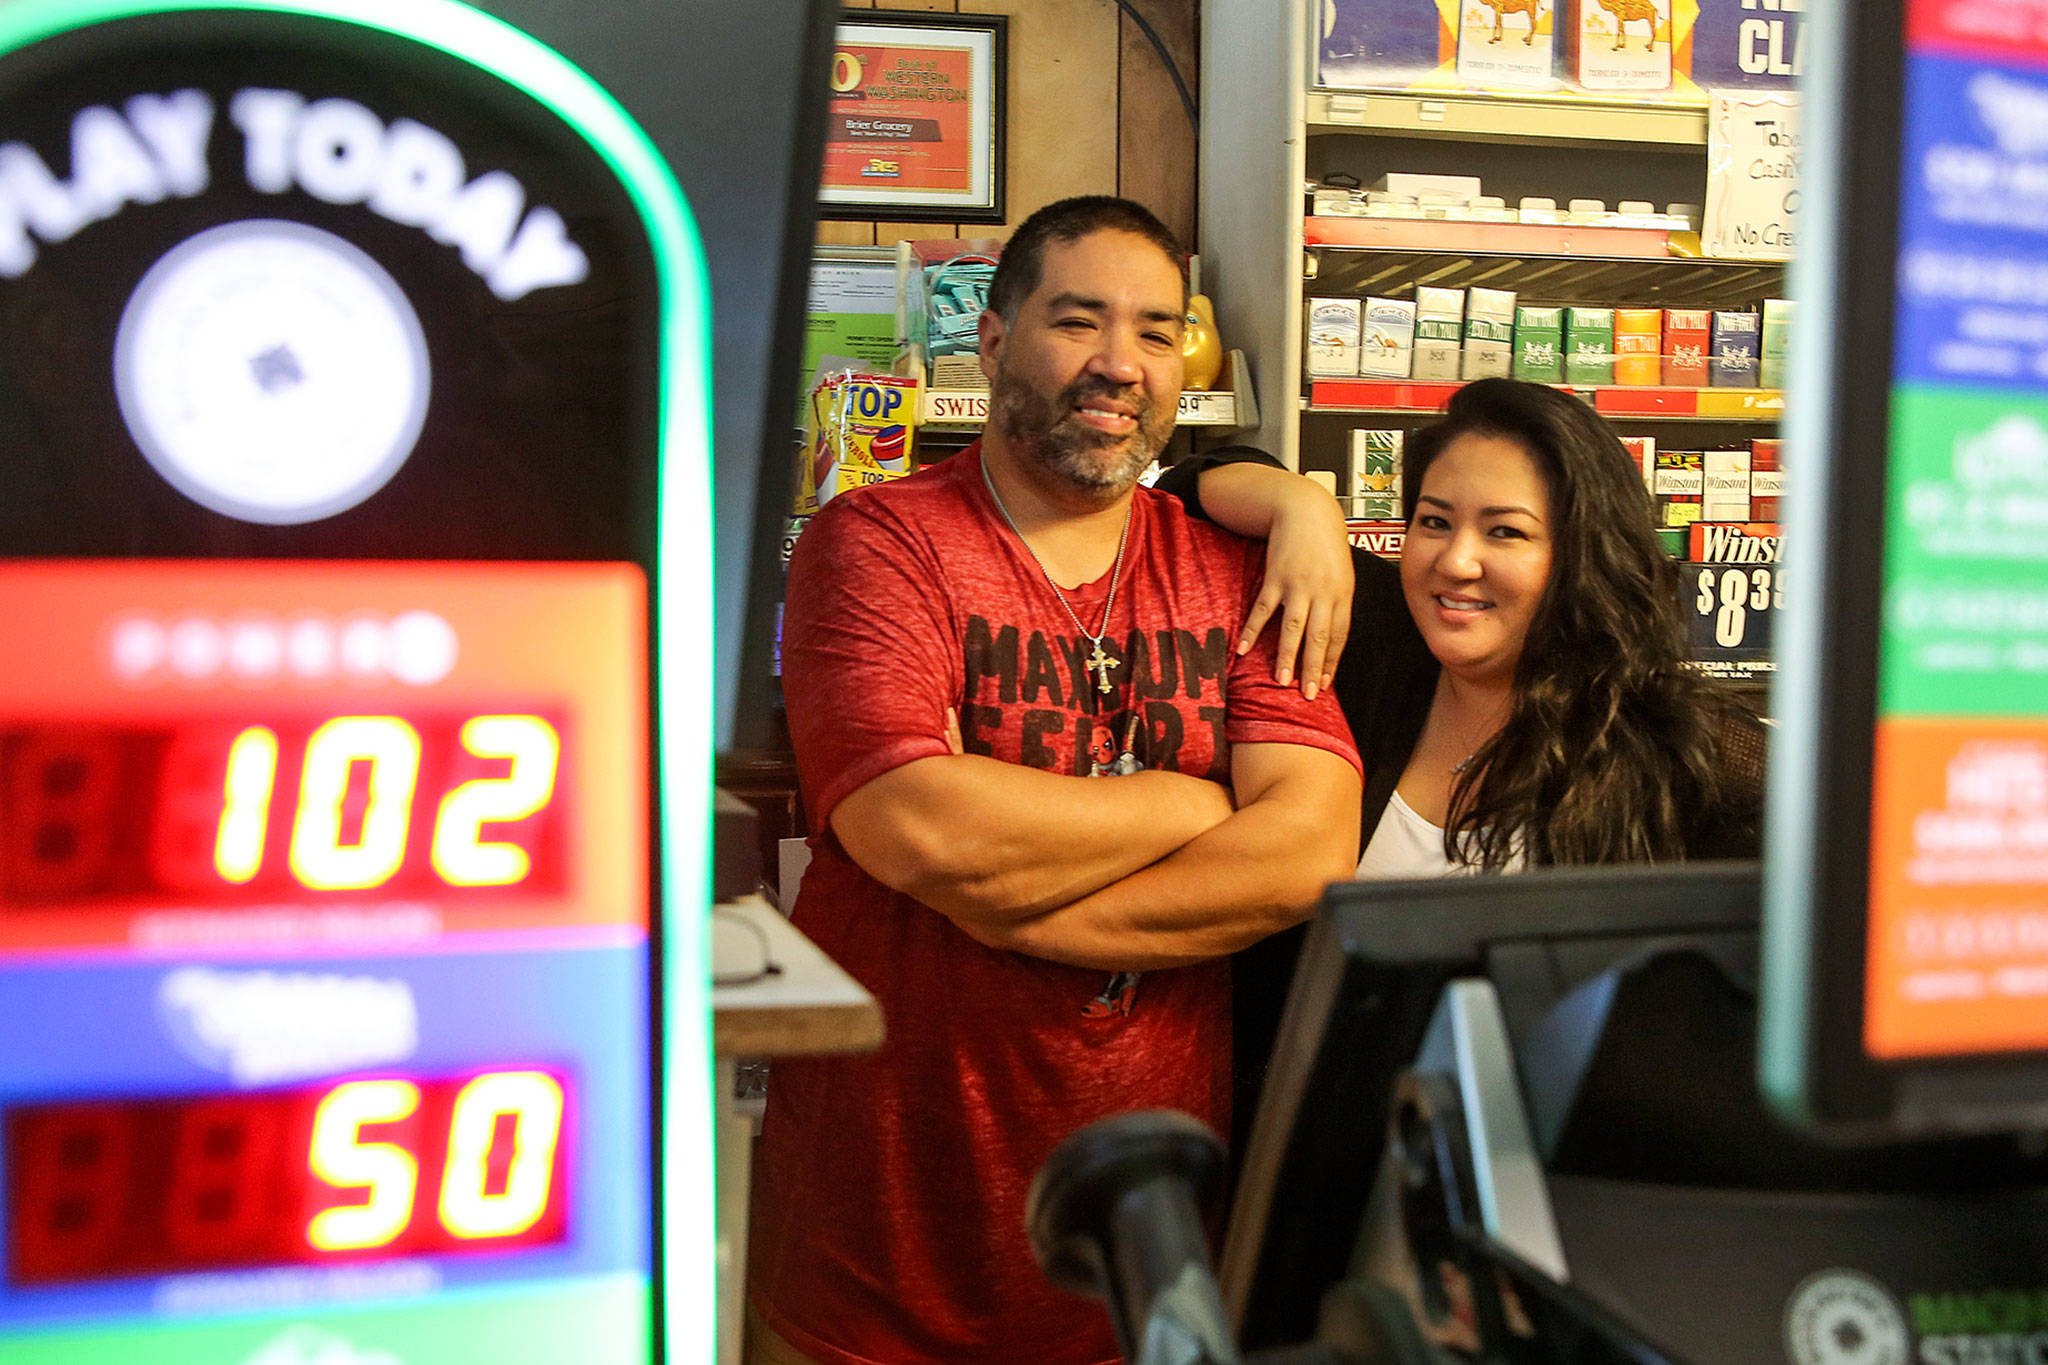 Charlie Andrade with his sister, Anna Andrade, at the family-owned Brier Grocery, which recently sold a $12.2 million Lotto ticket. The small neighborhood market received a $122,000 bonus commission from the state for selling the winning ticket. (Kevin Clark / The Herald)